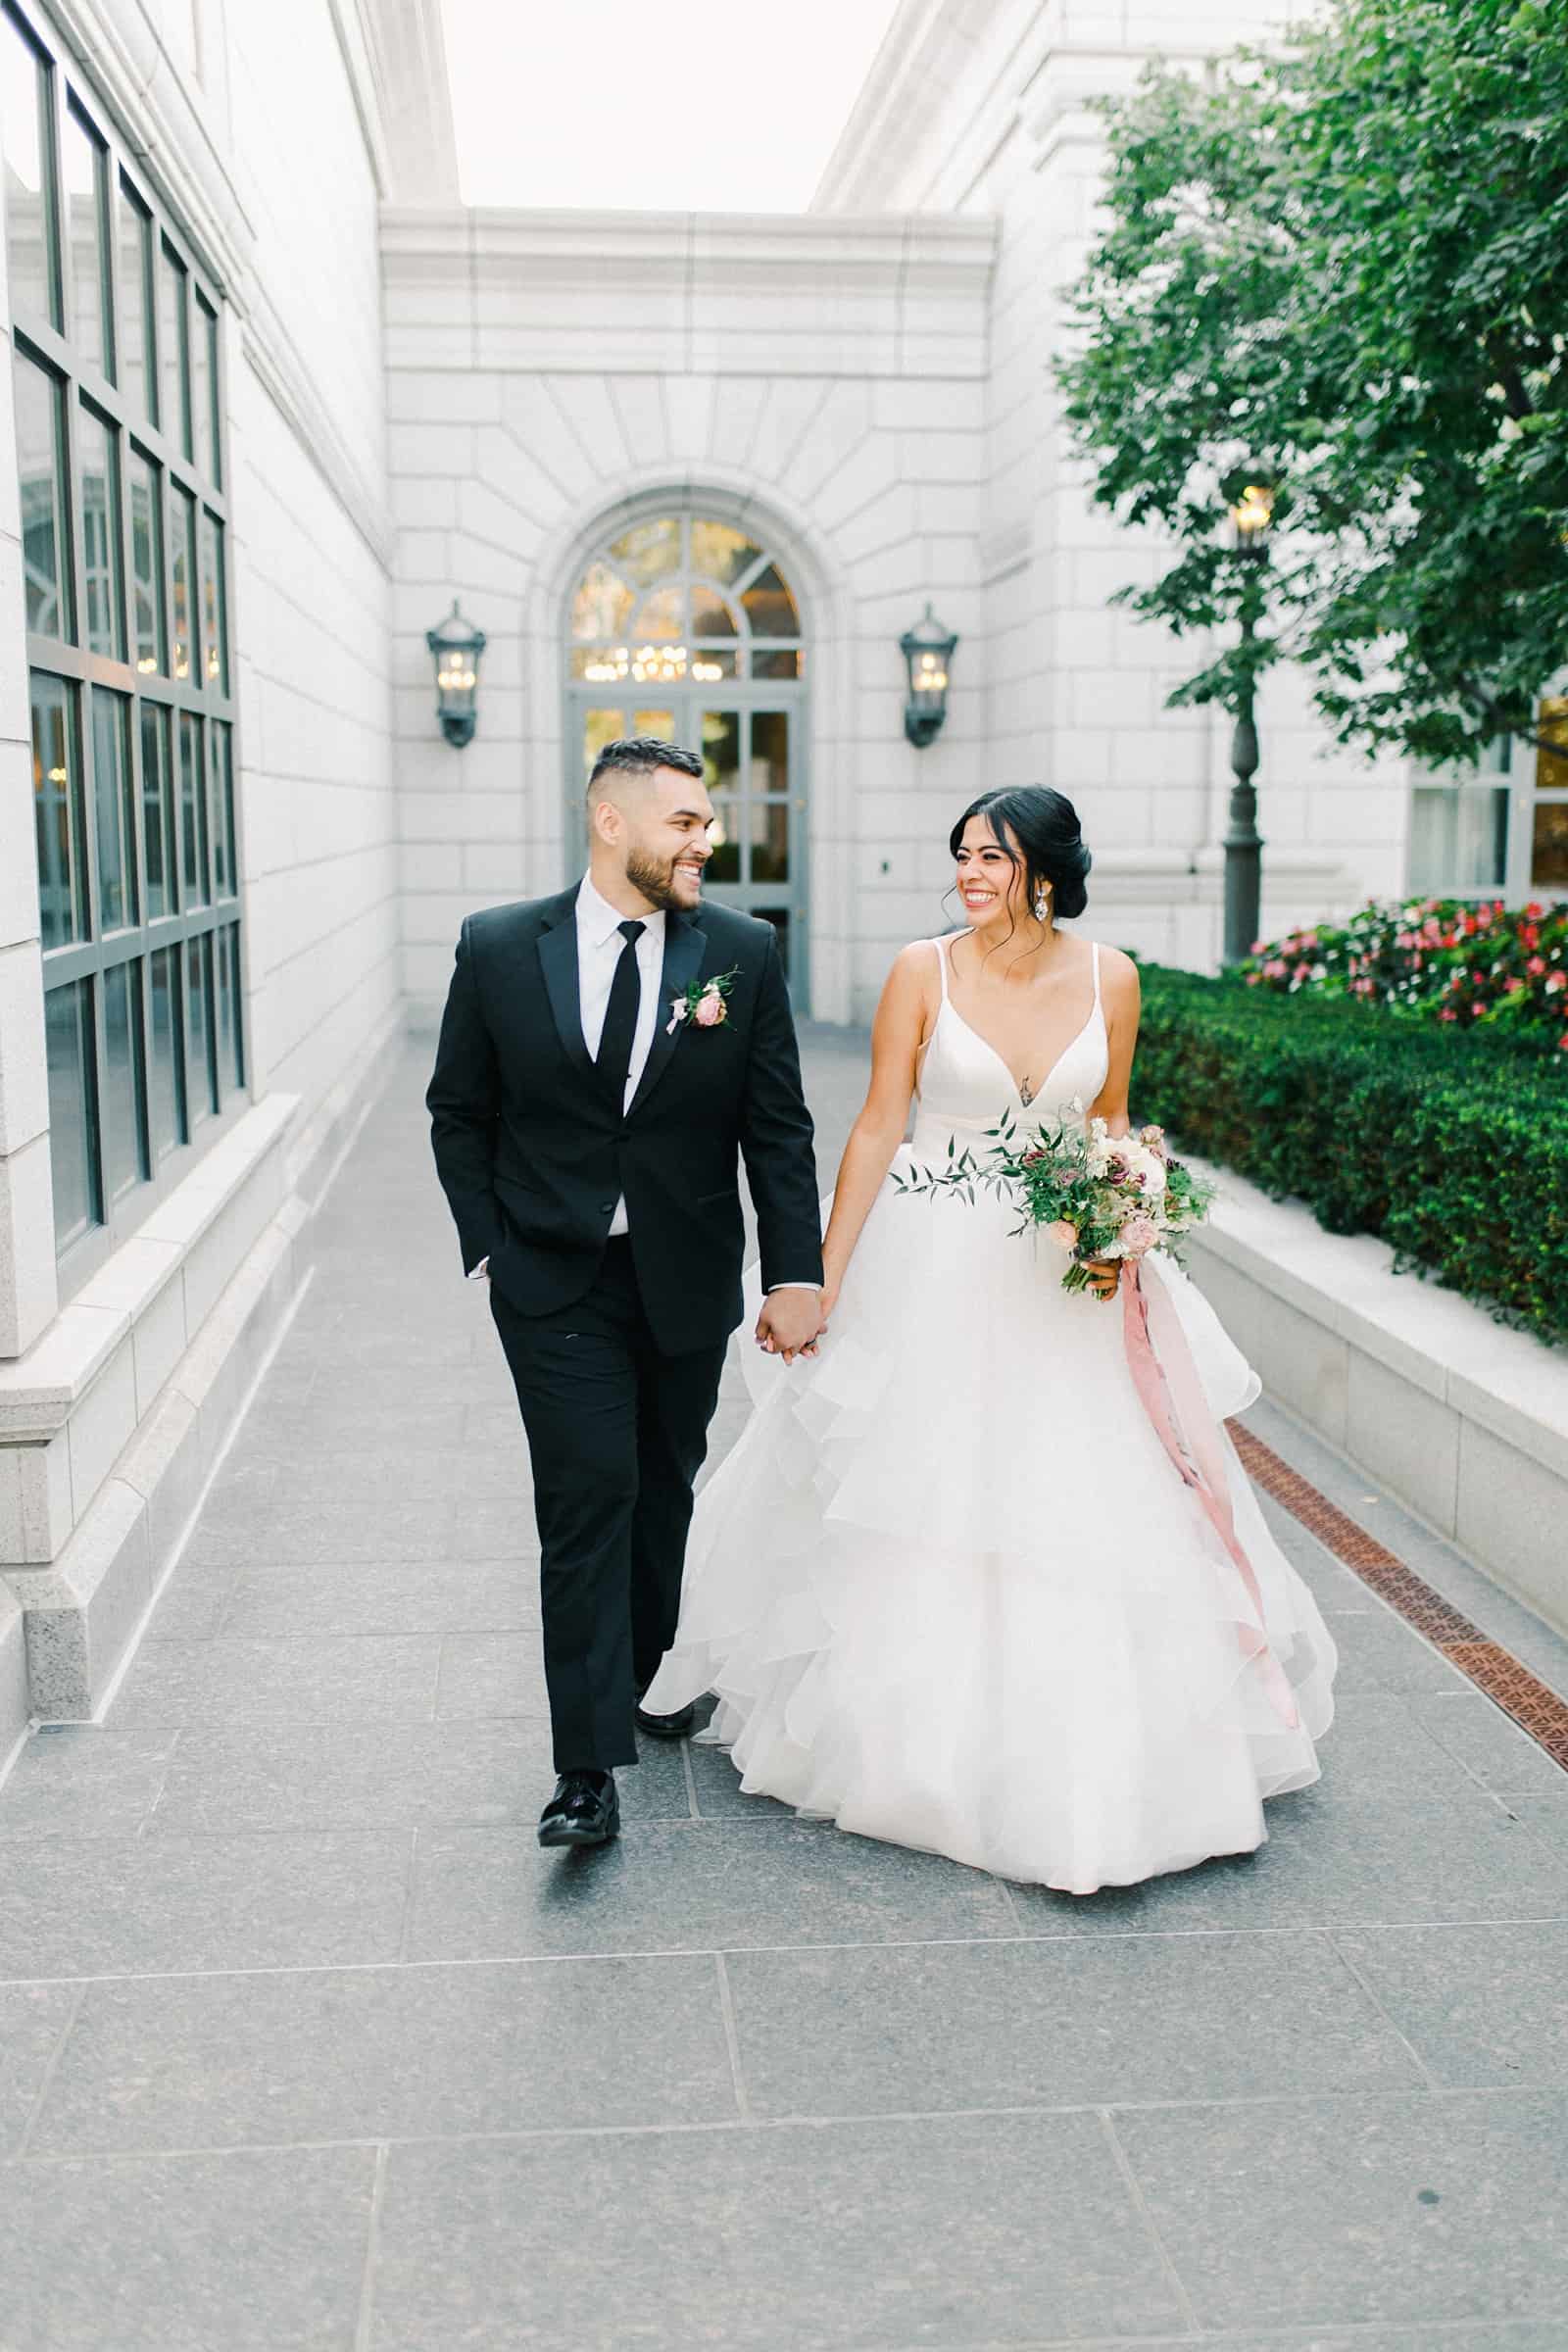 Bride and groom walking together inside the Grand America hotel courtyard